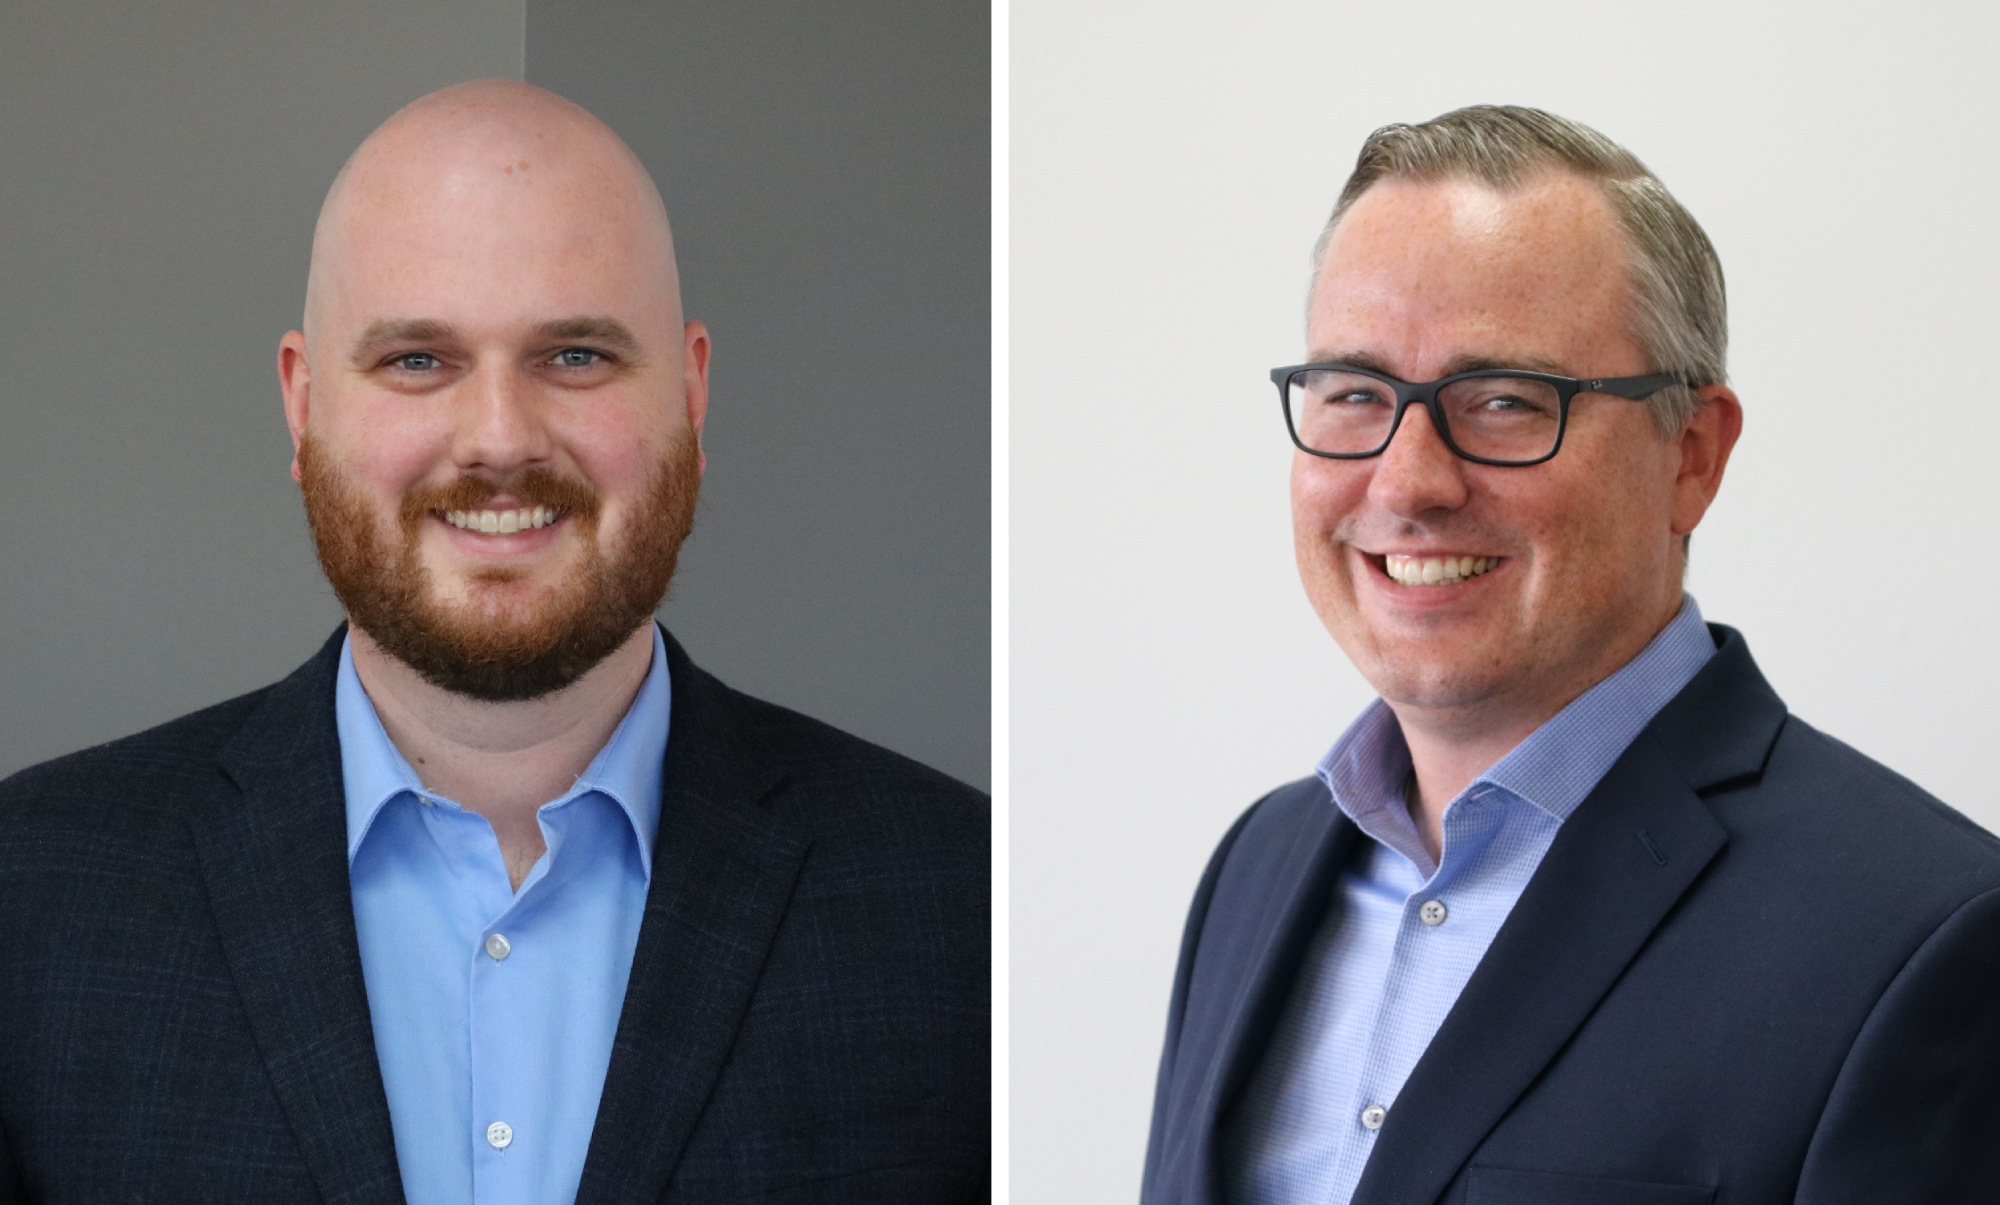 Congratulations to Adam Thompson and Blair Gamracy, our newest certified RRO’s!